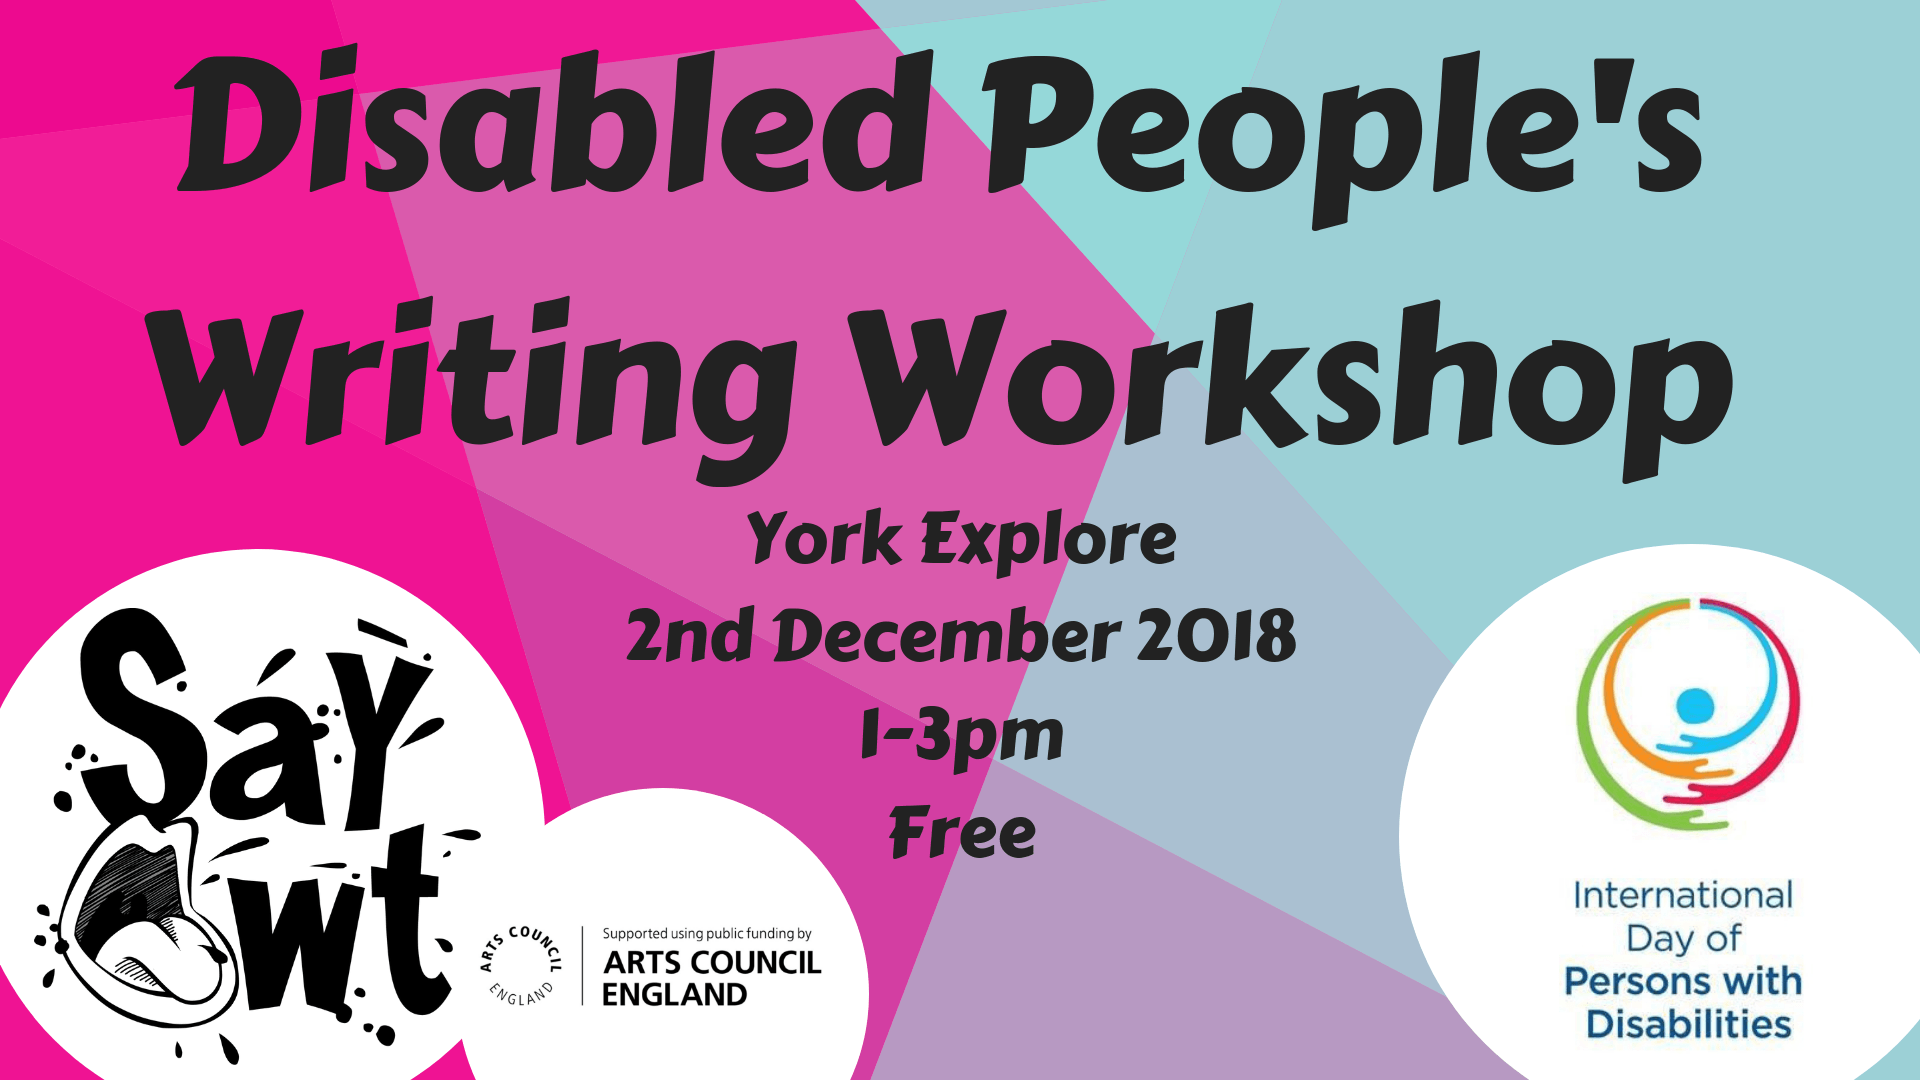 DISABLED PEOPLE'S WRITING WORKSHOP